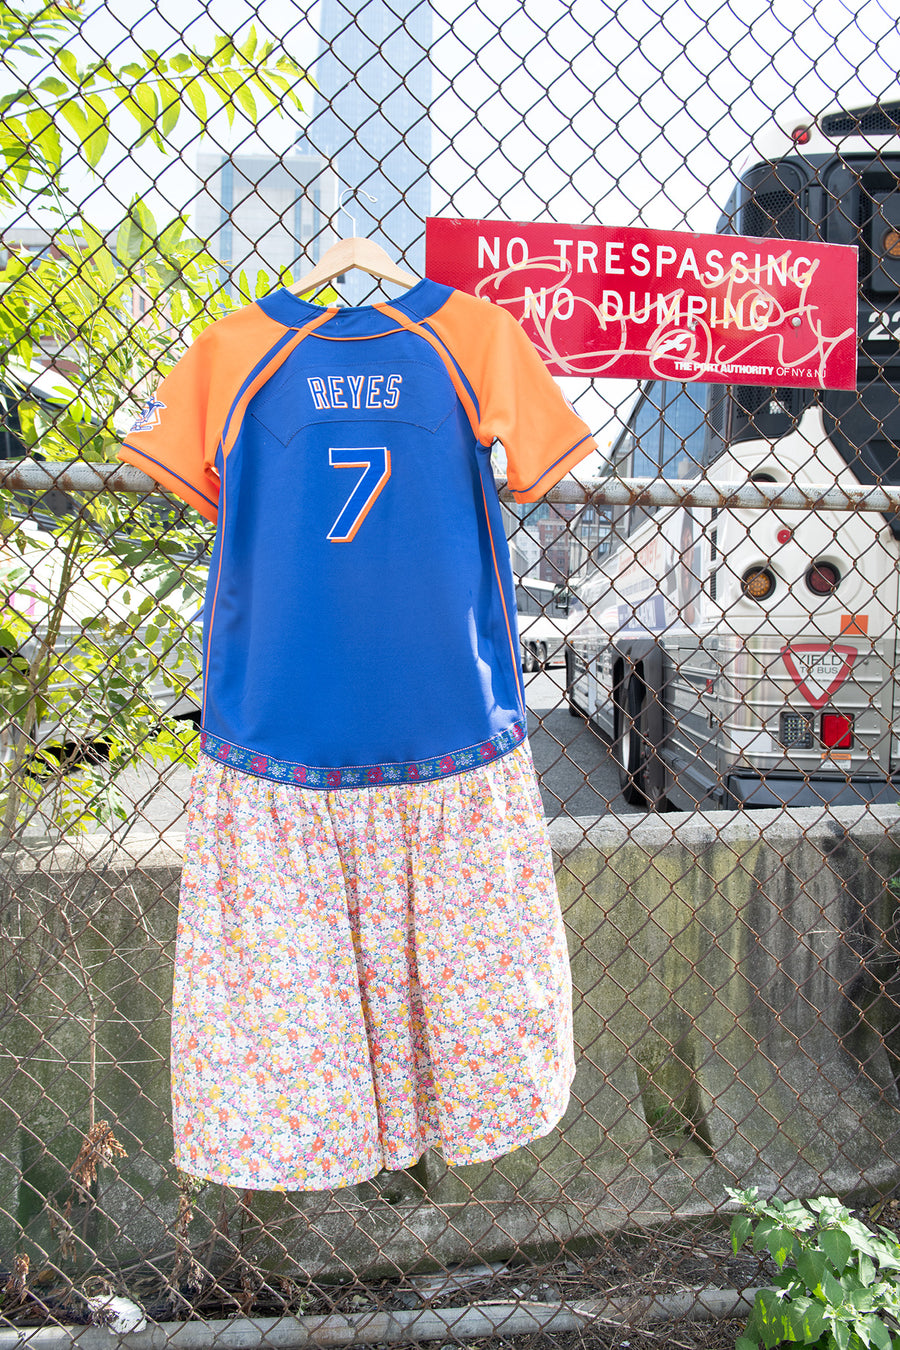 One-of-a-Kind Vintage New York Mets Jersey